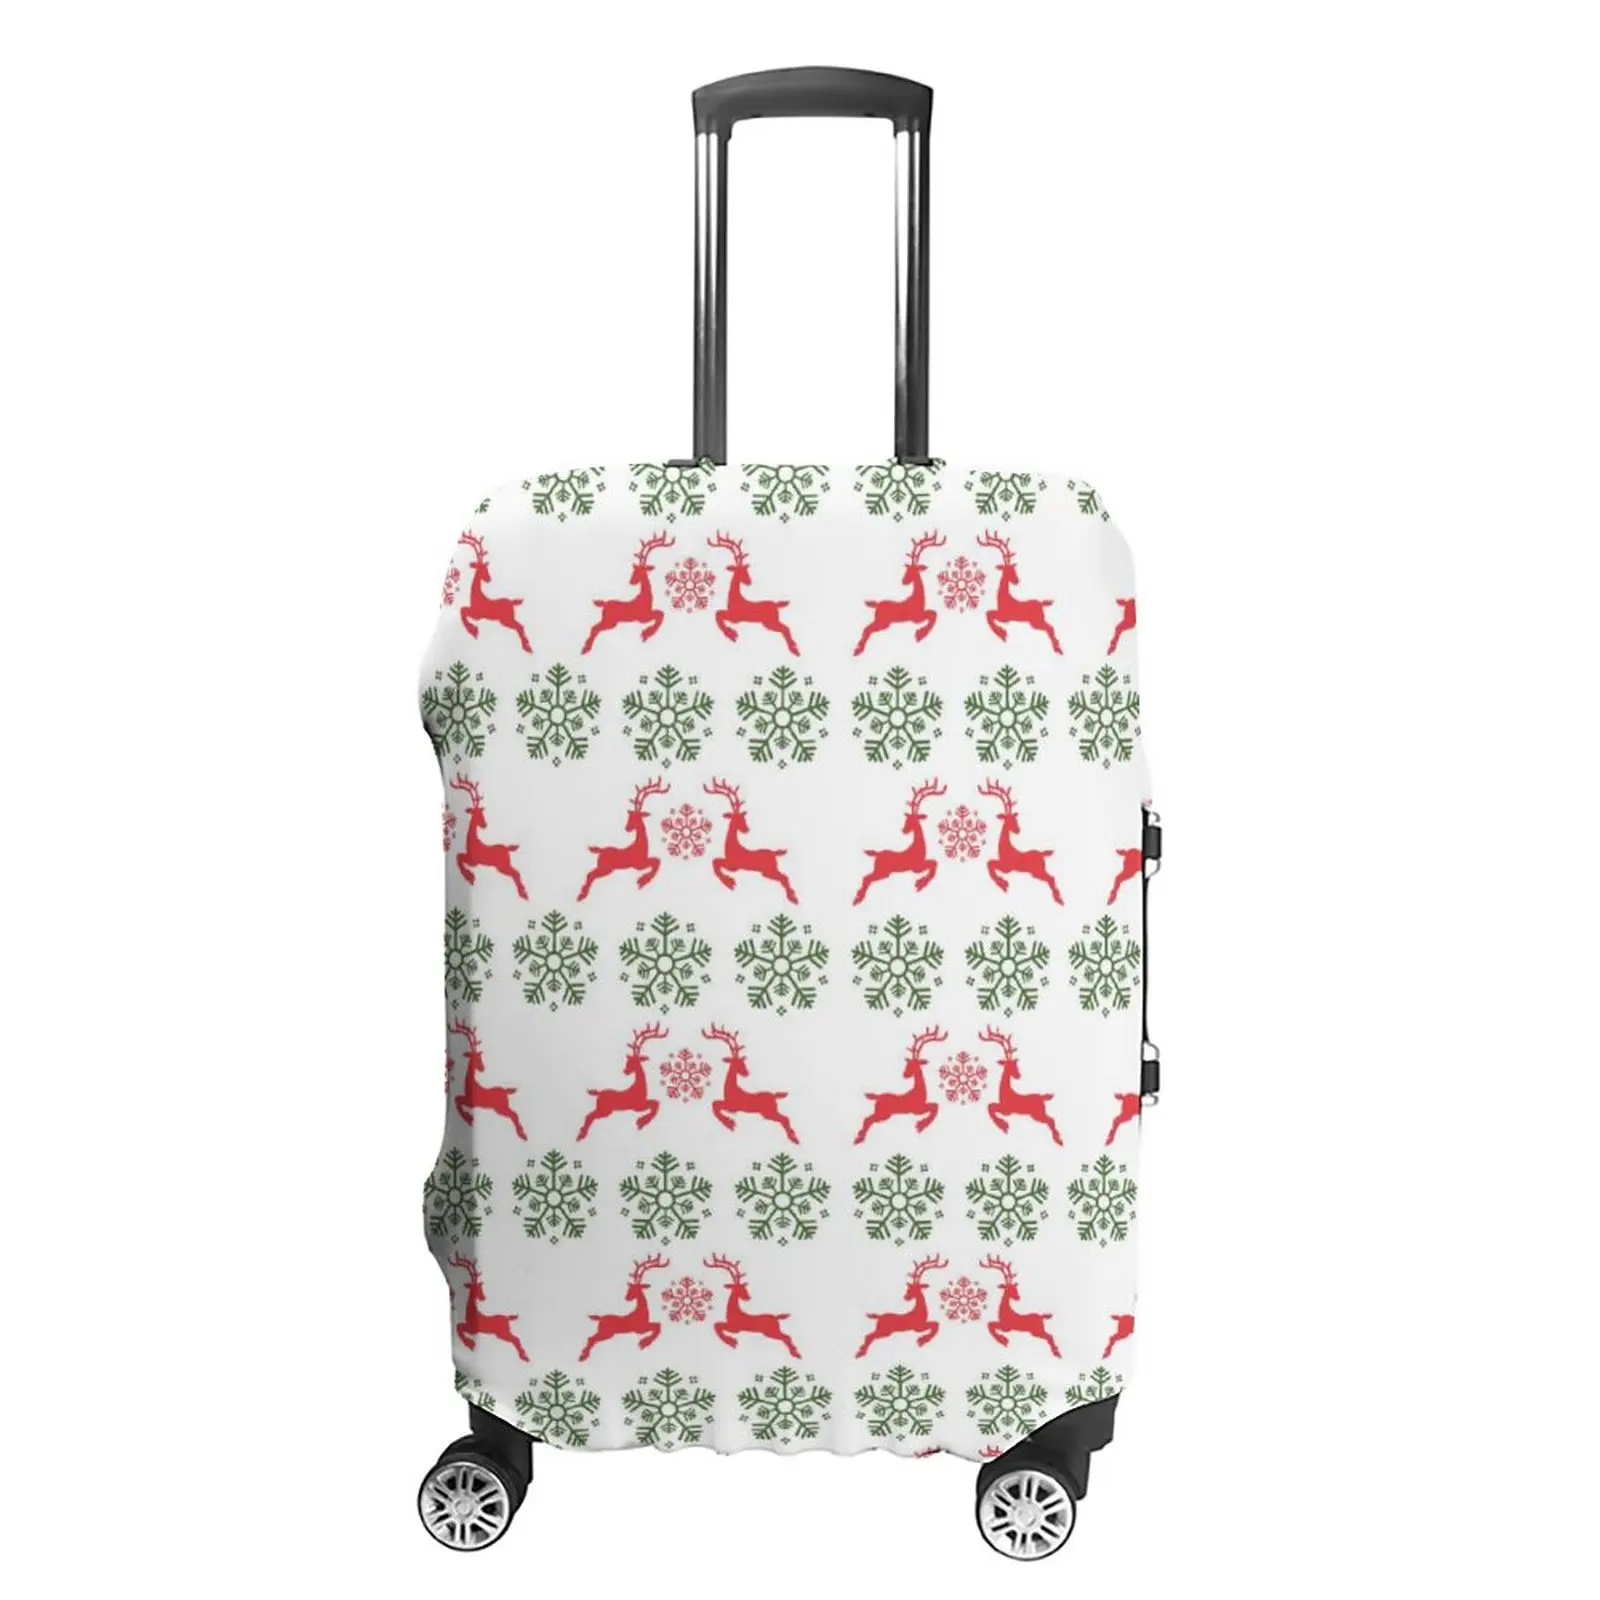 Christmas snowflakeTrolley Case Cover Luggage Protector Suitcase Cover Luggage Covers Luggage Storage Covers Luggage Supplies